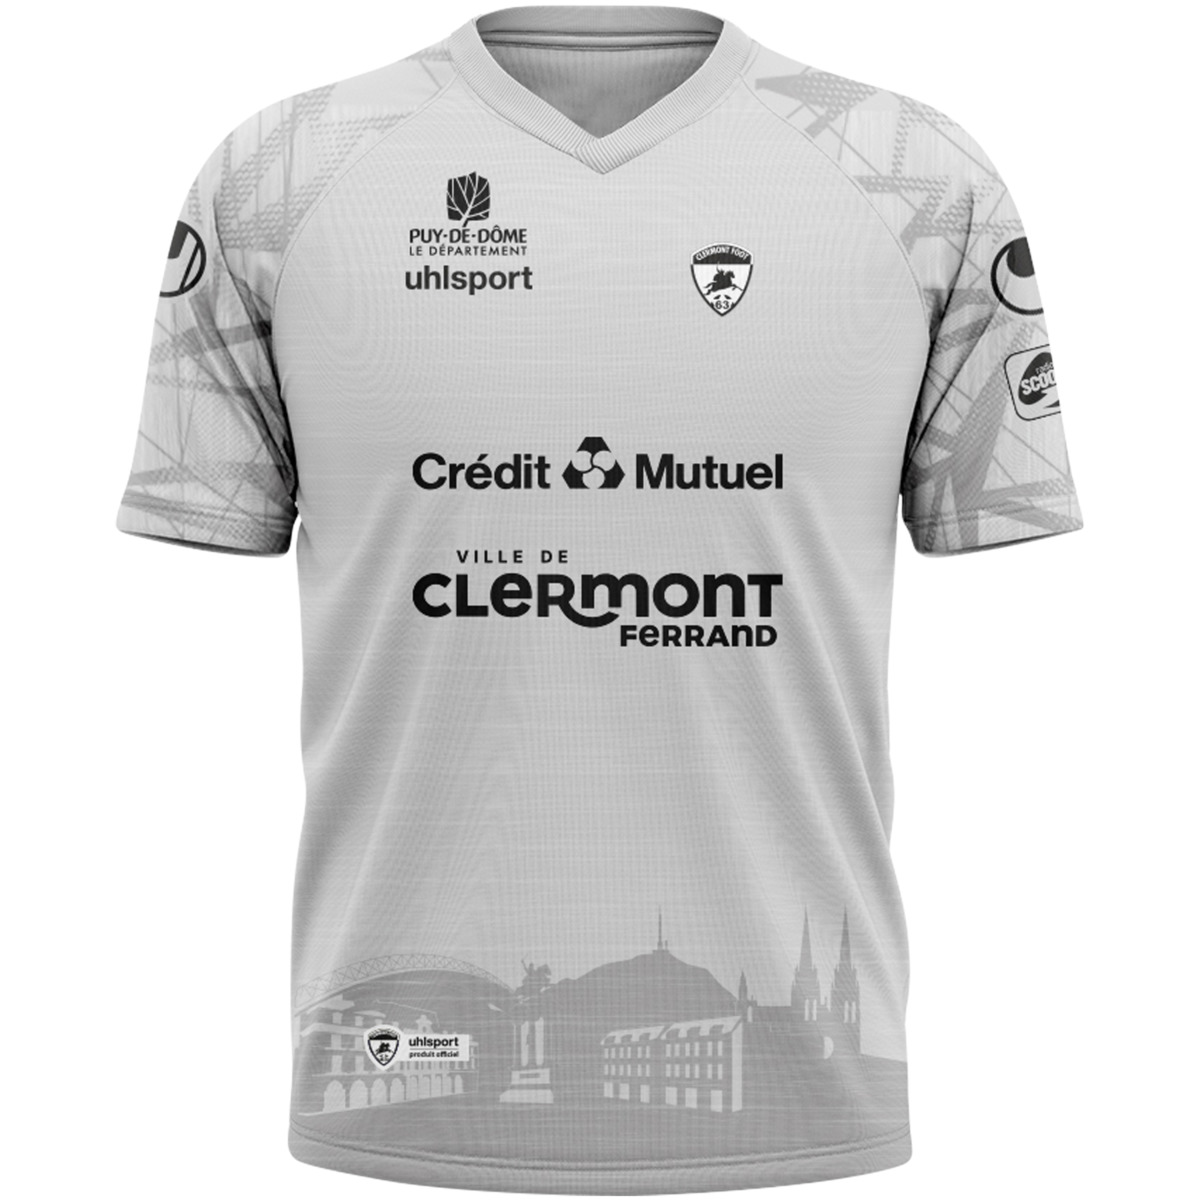 Your official CLERMONT FOOT fan shirt